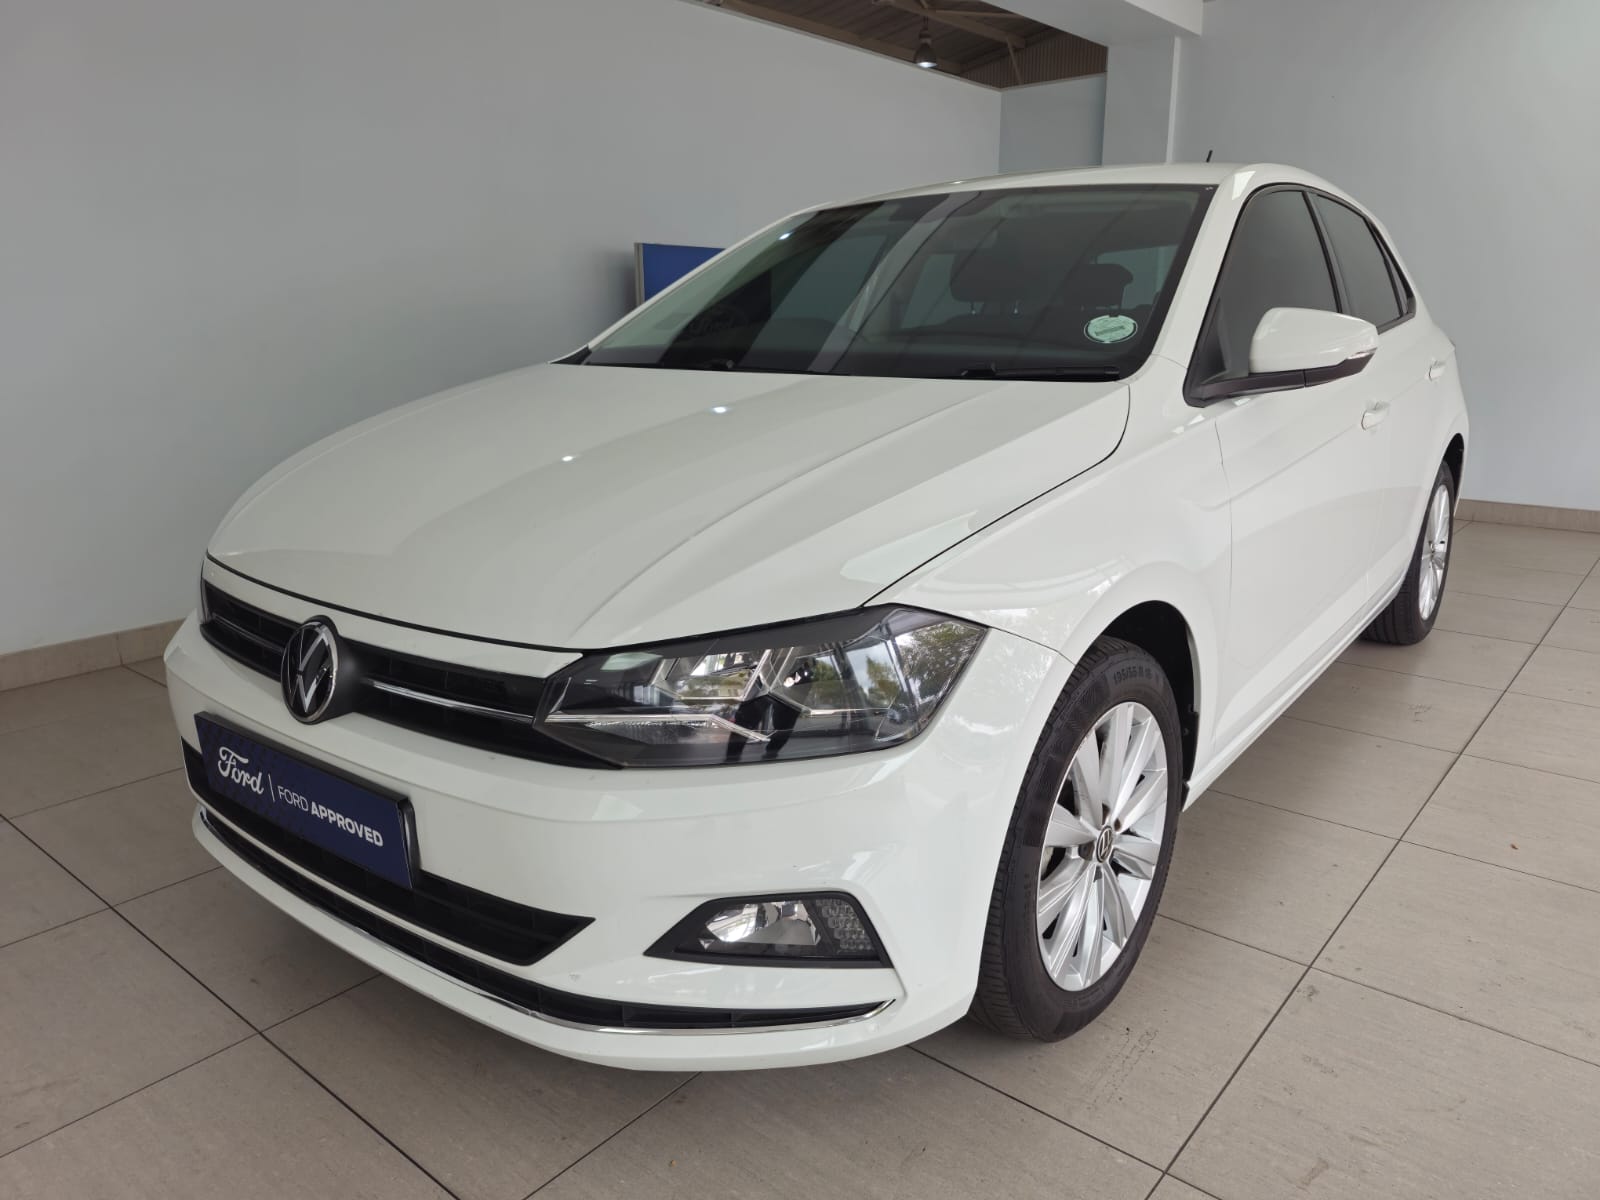 2021 Volkswagen Polo Hatch  for sale - UF70825